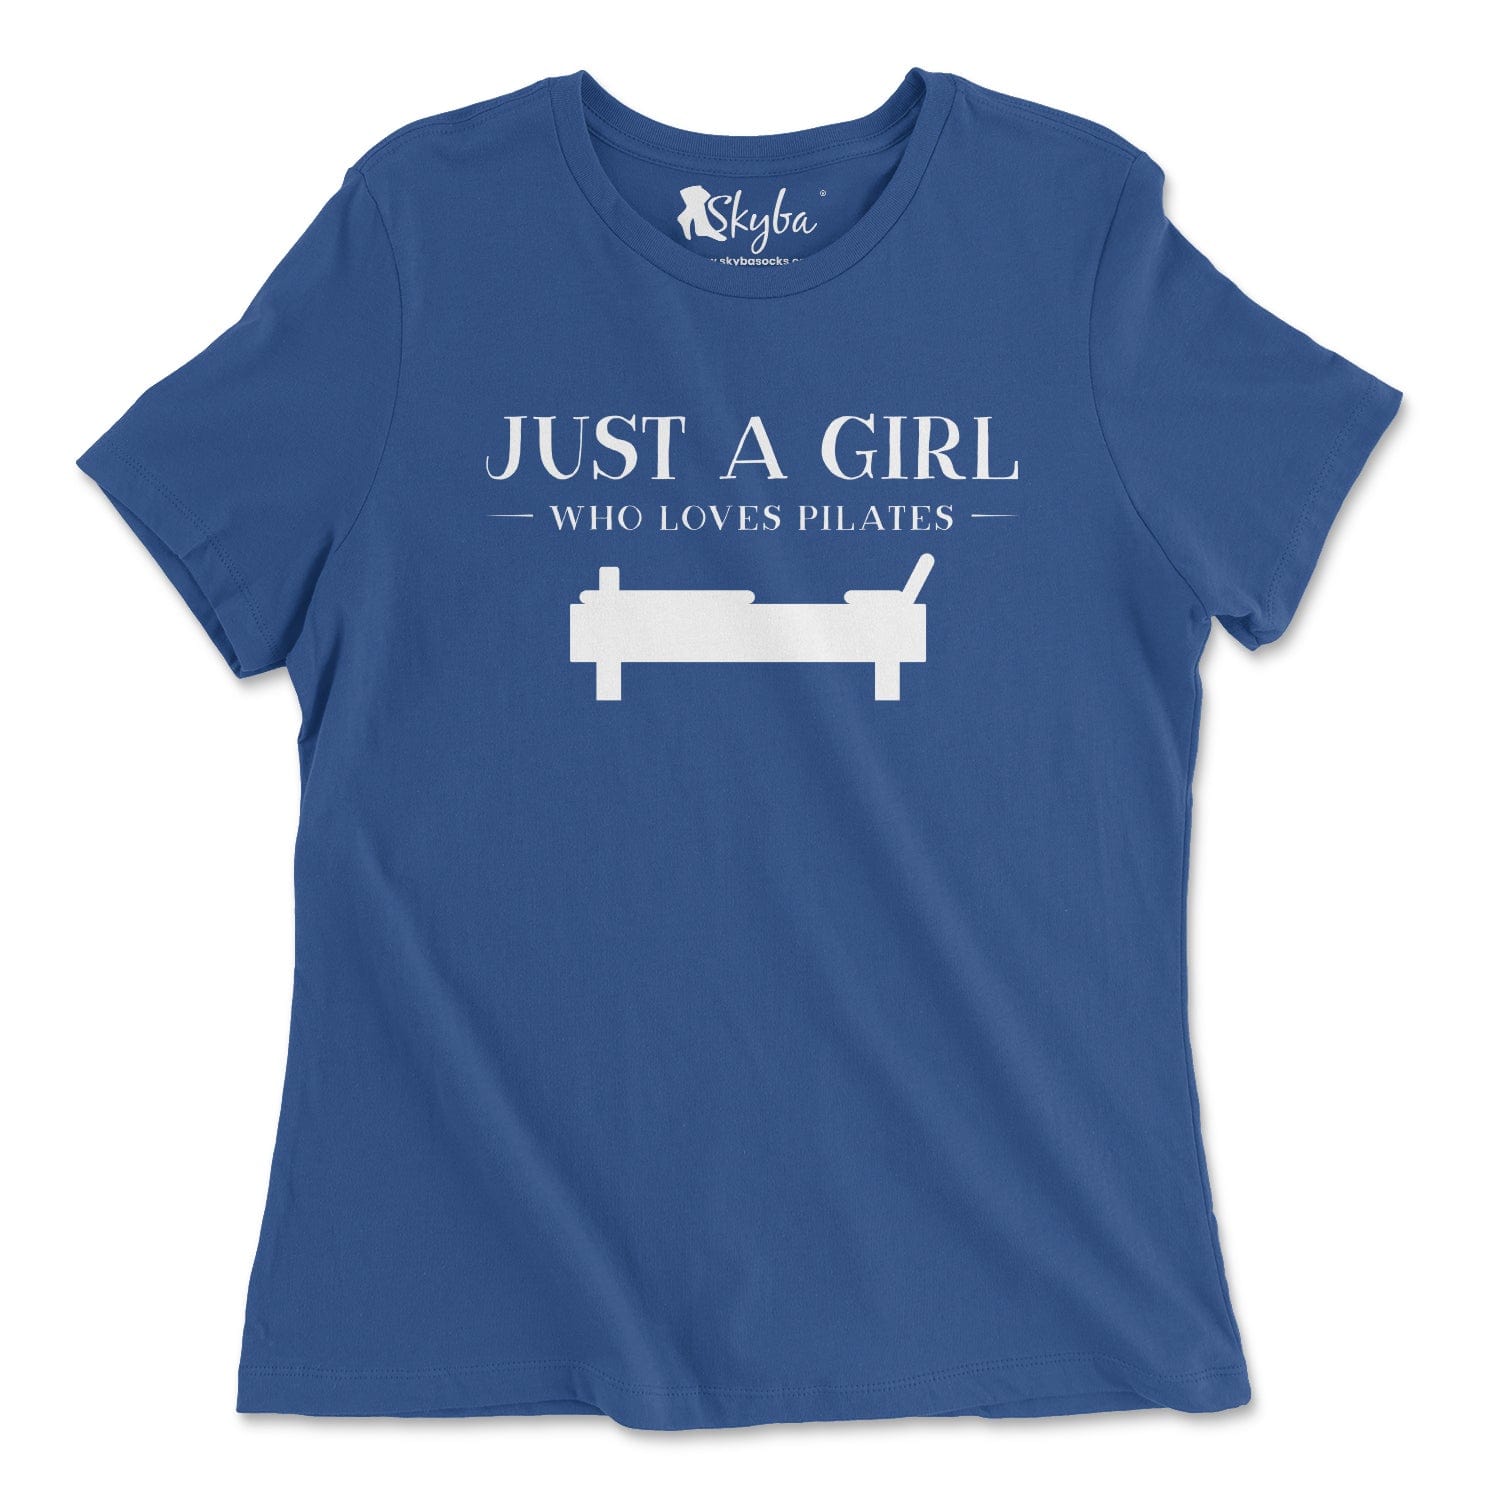 Just a Girl Who Loves Pilates - Classic Tee Skyba T-Shirt